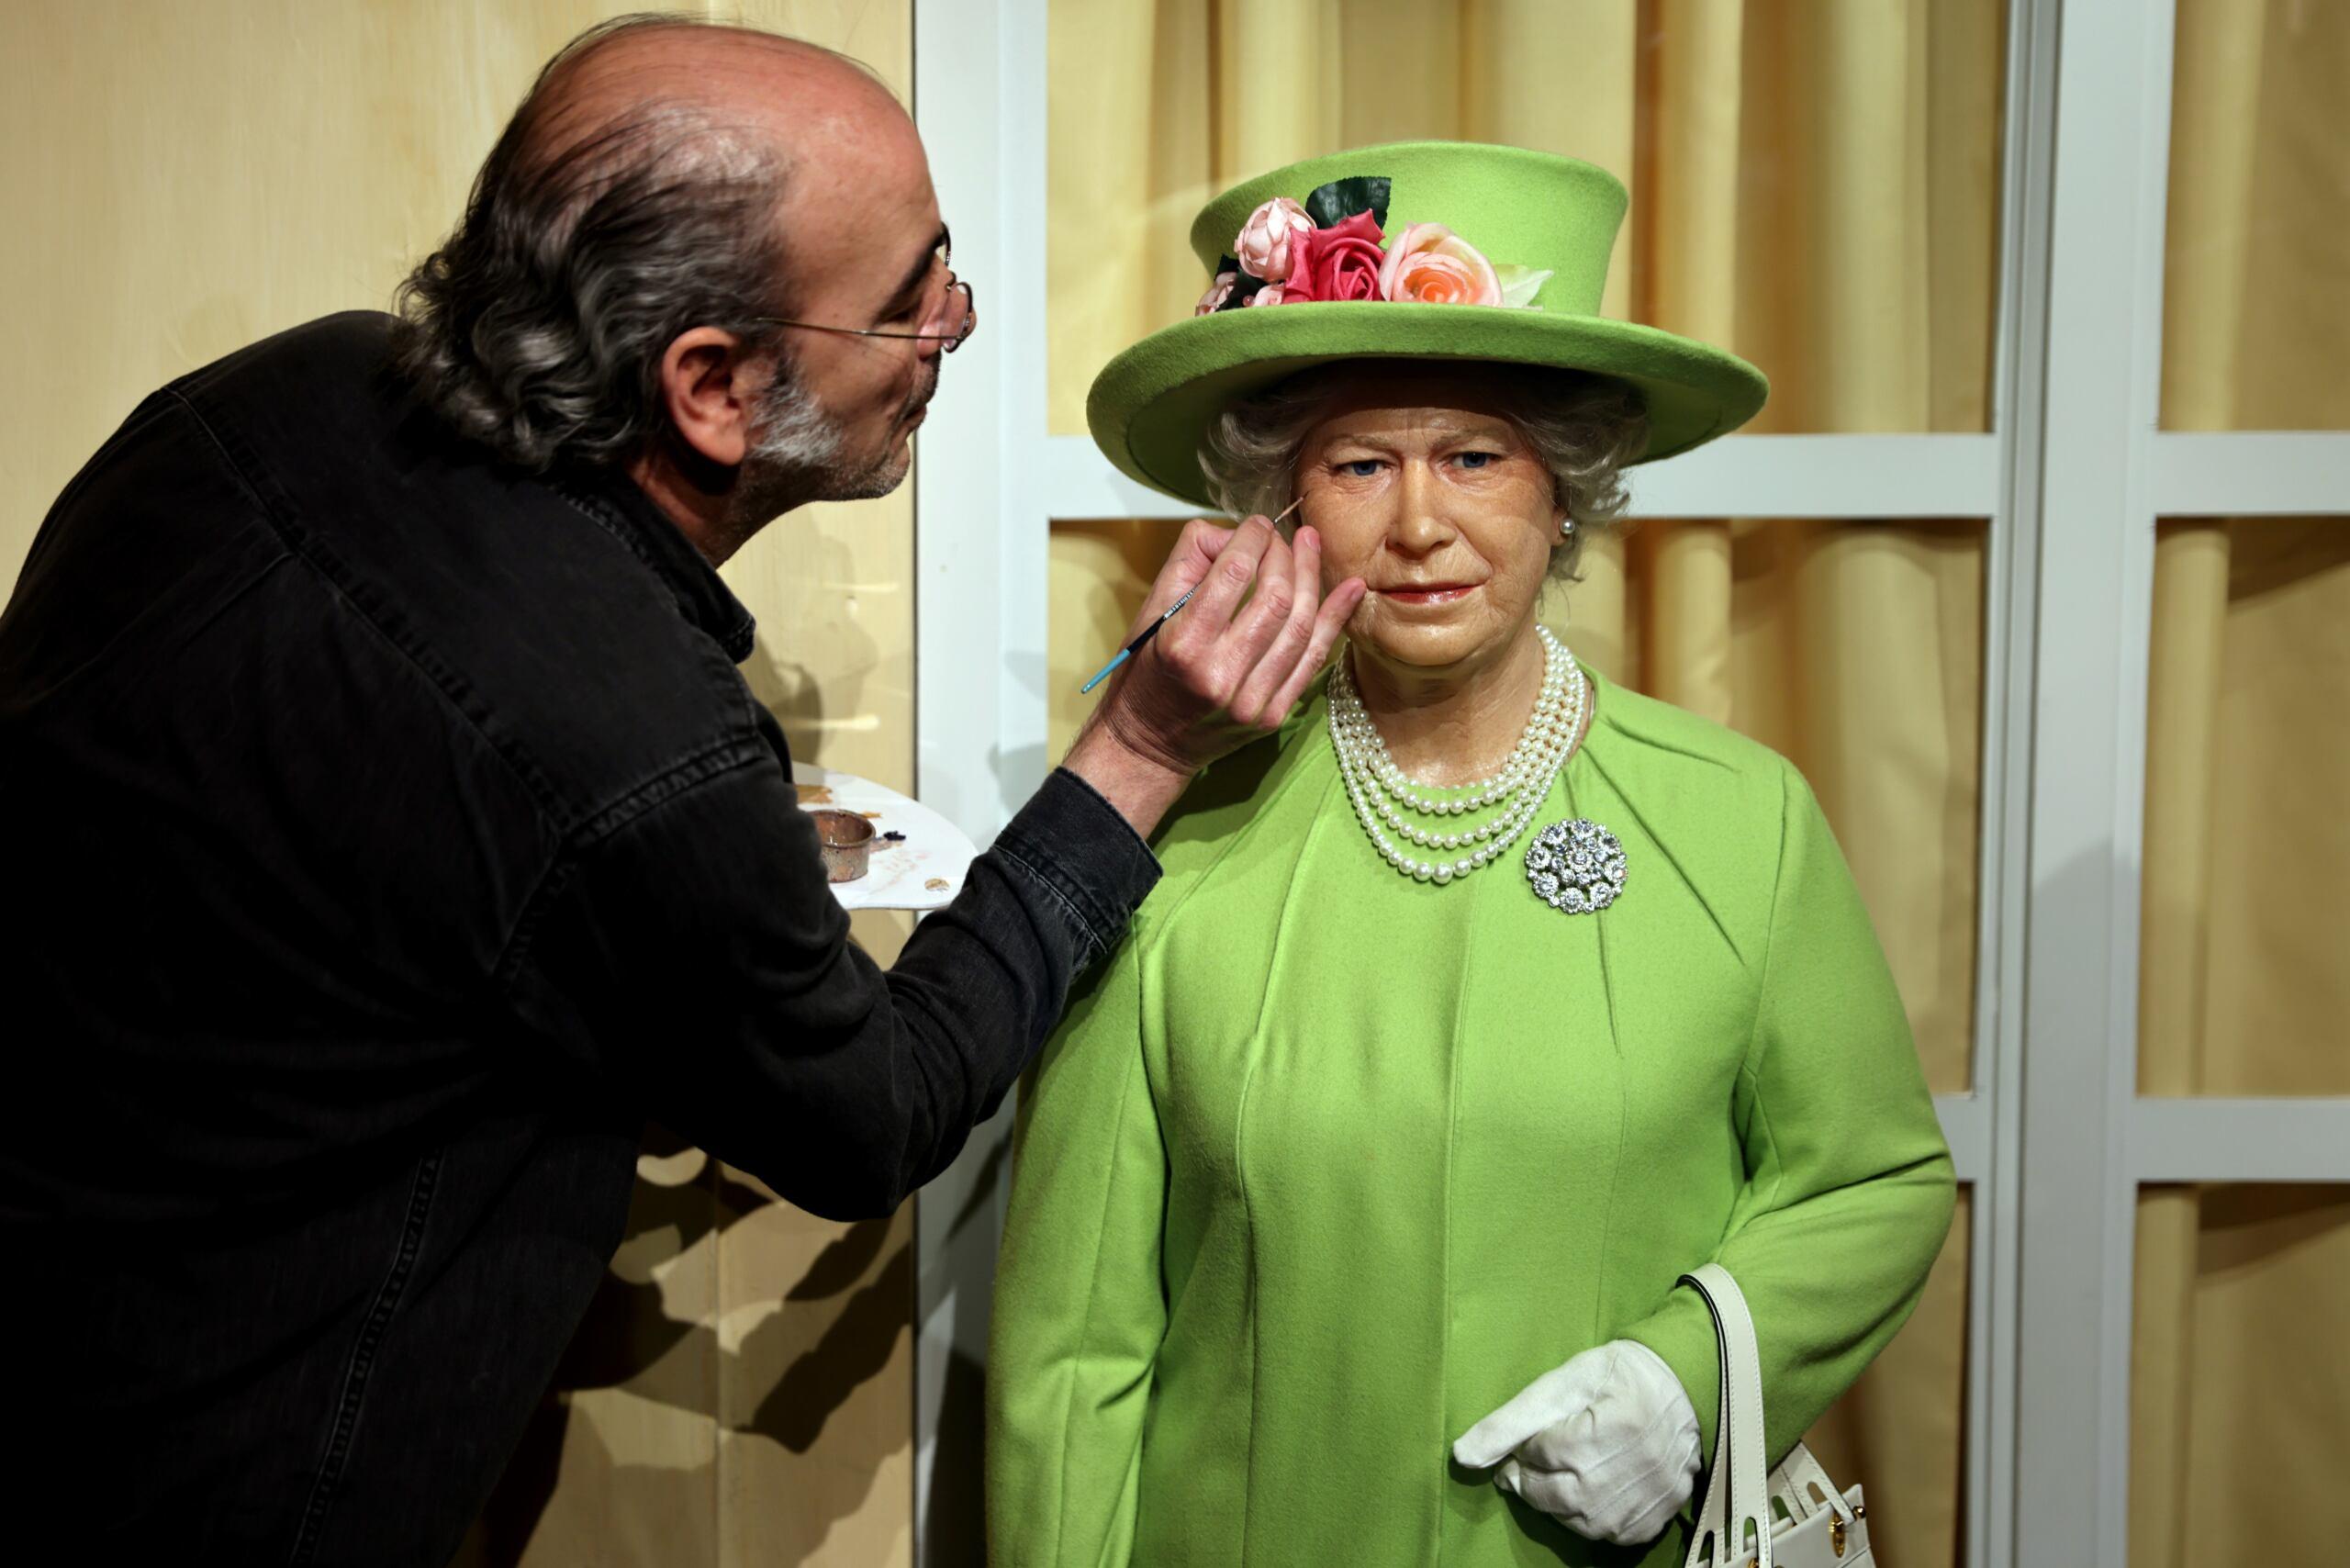 An artist renovate the wax statue of British Queen Elisabeth II at the Musee Grevin in Paris on June 2, 2022, as Britain celebrates the Queen's platinum jubilee. (Photo by Thomas COEX / AFP)